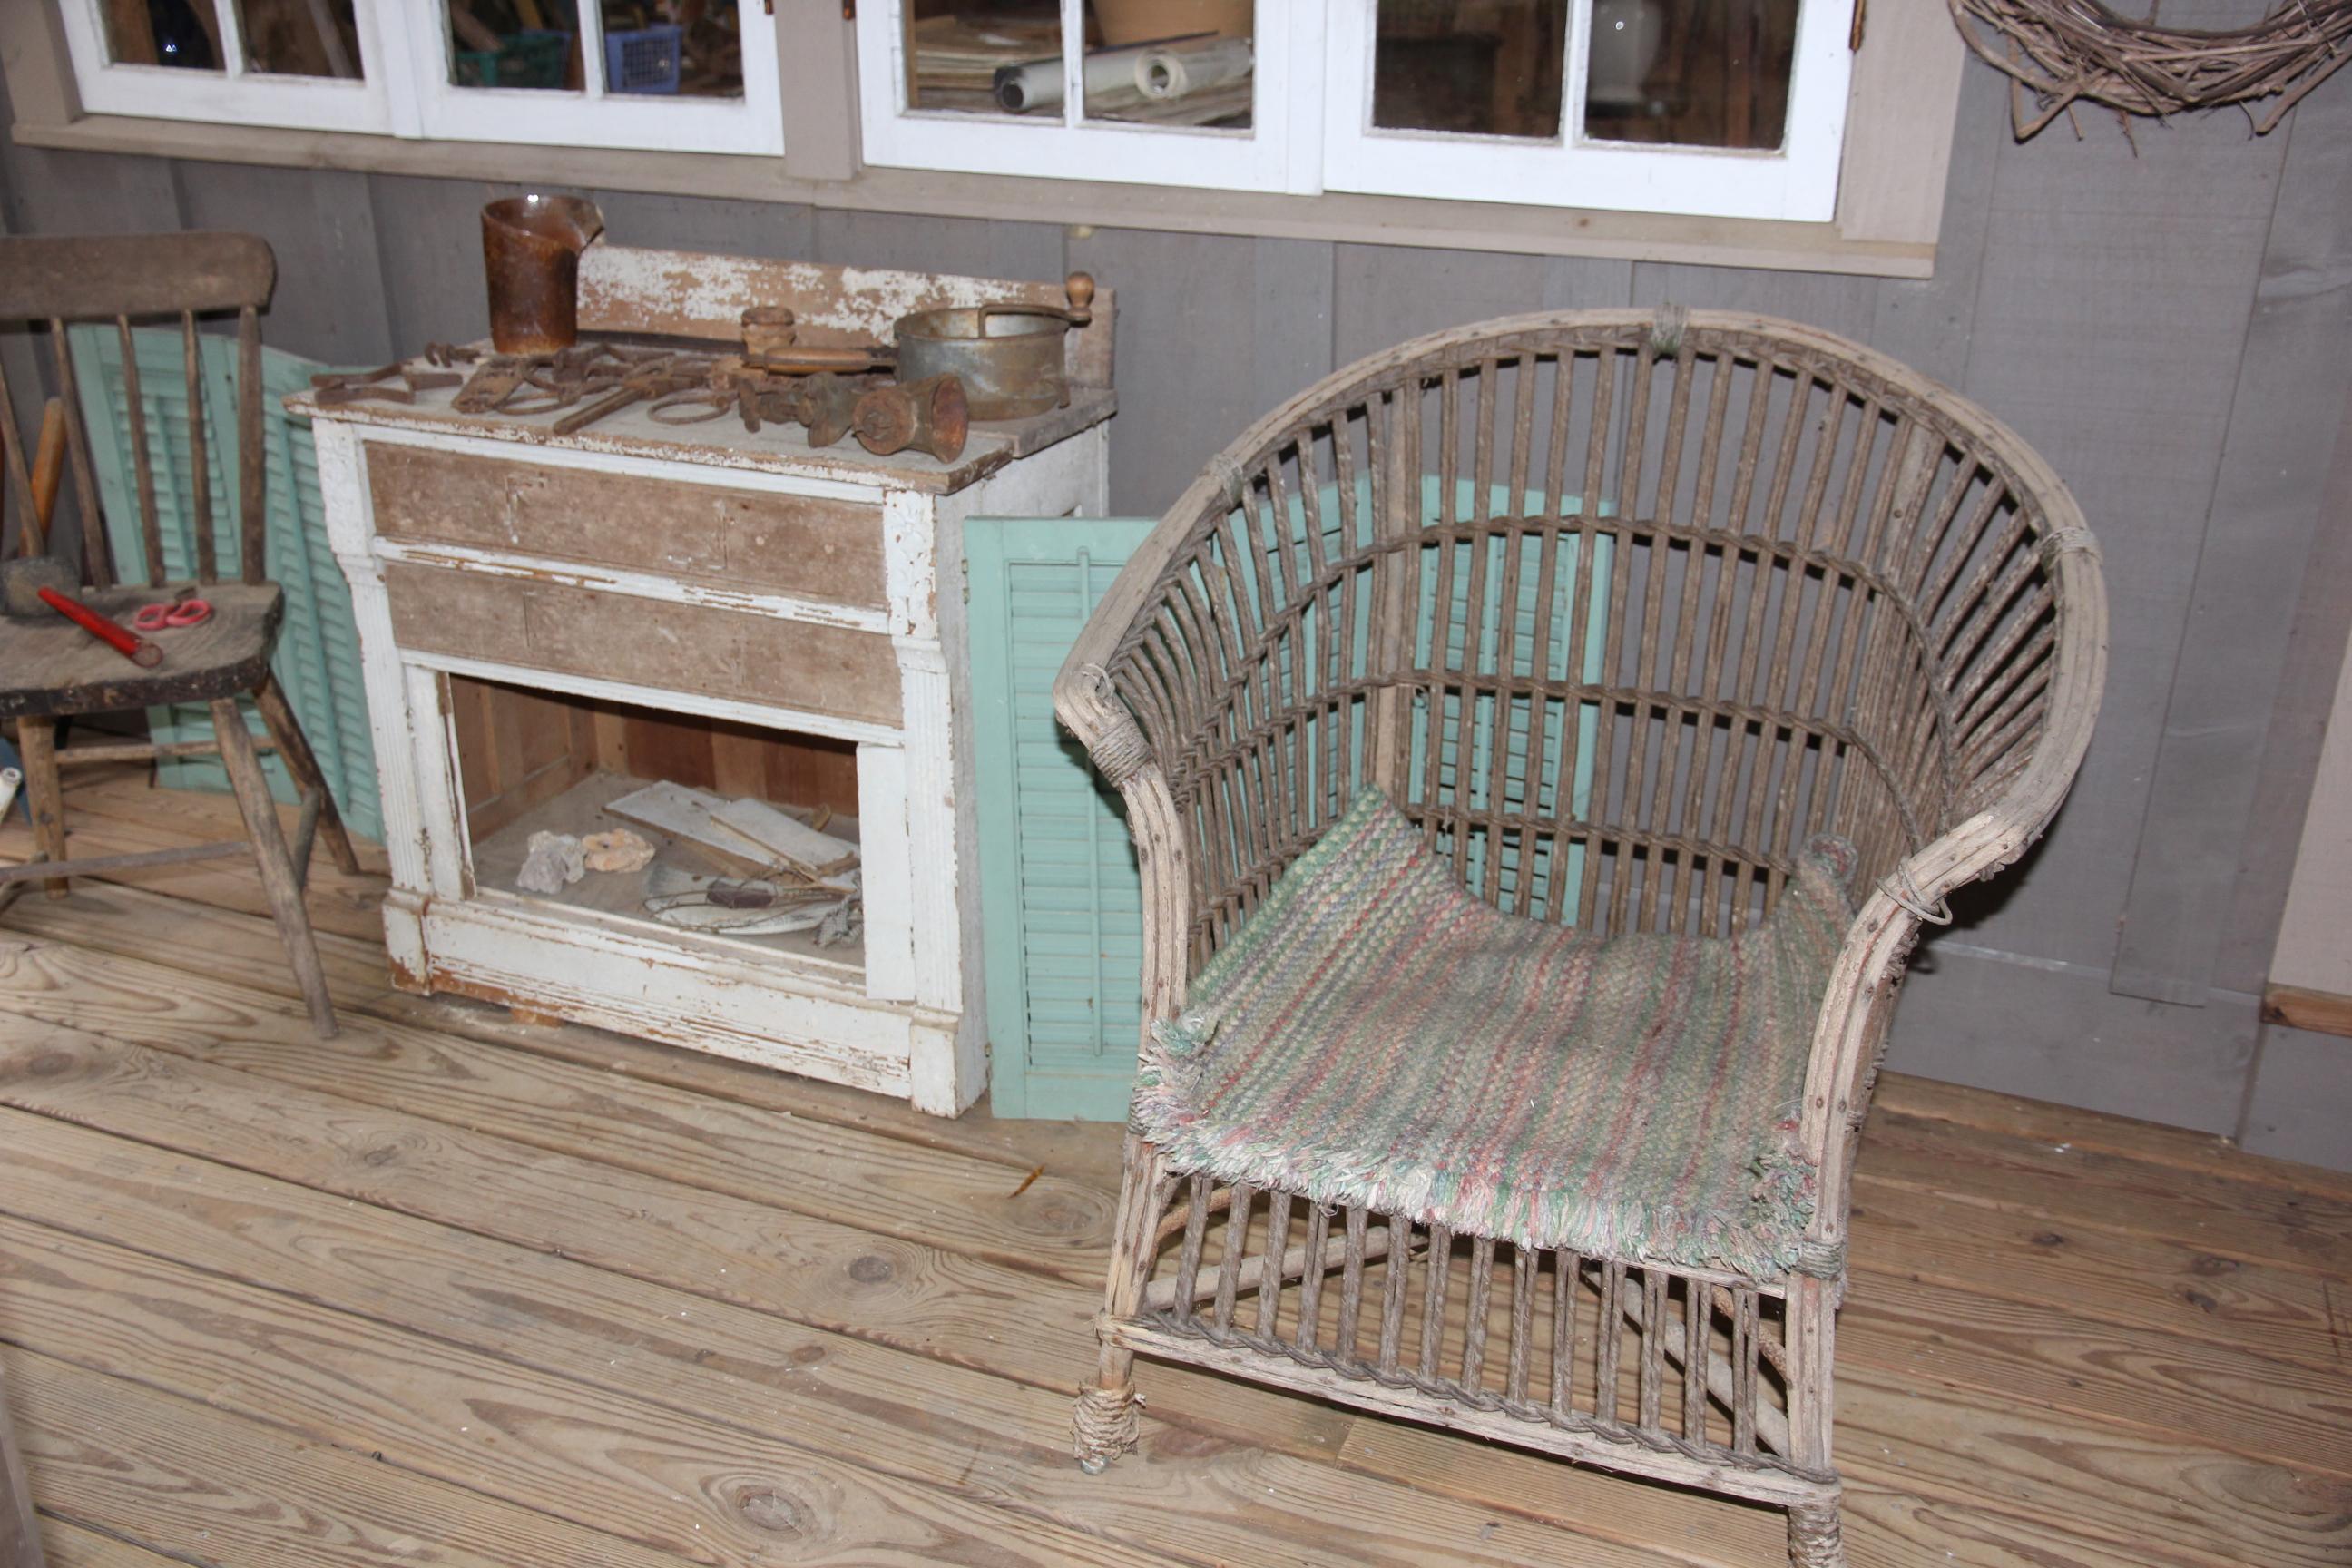 nice old wicker chair, misc. wood items with old paint